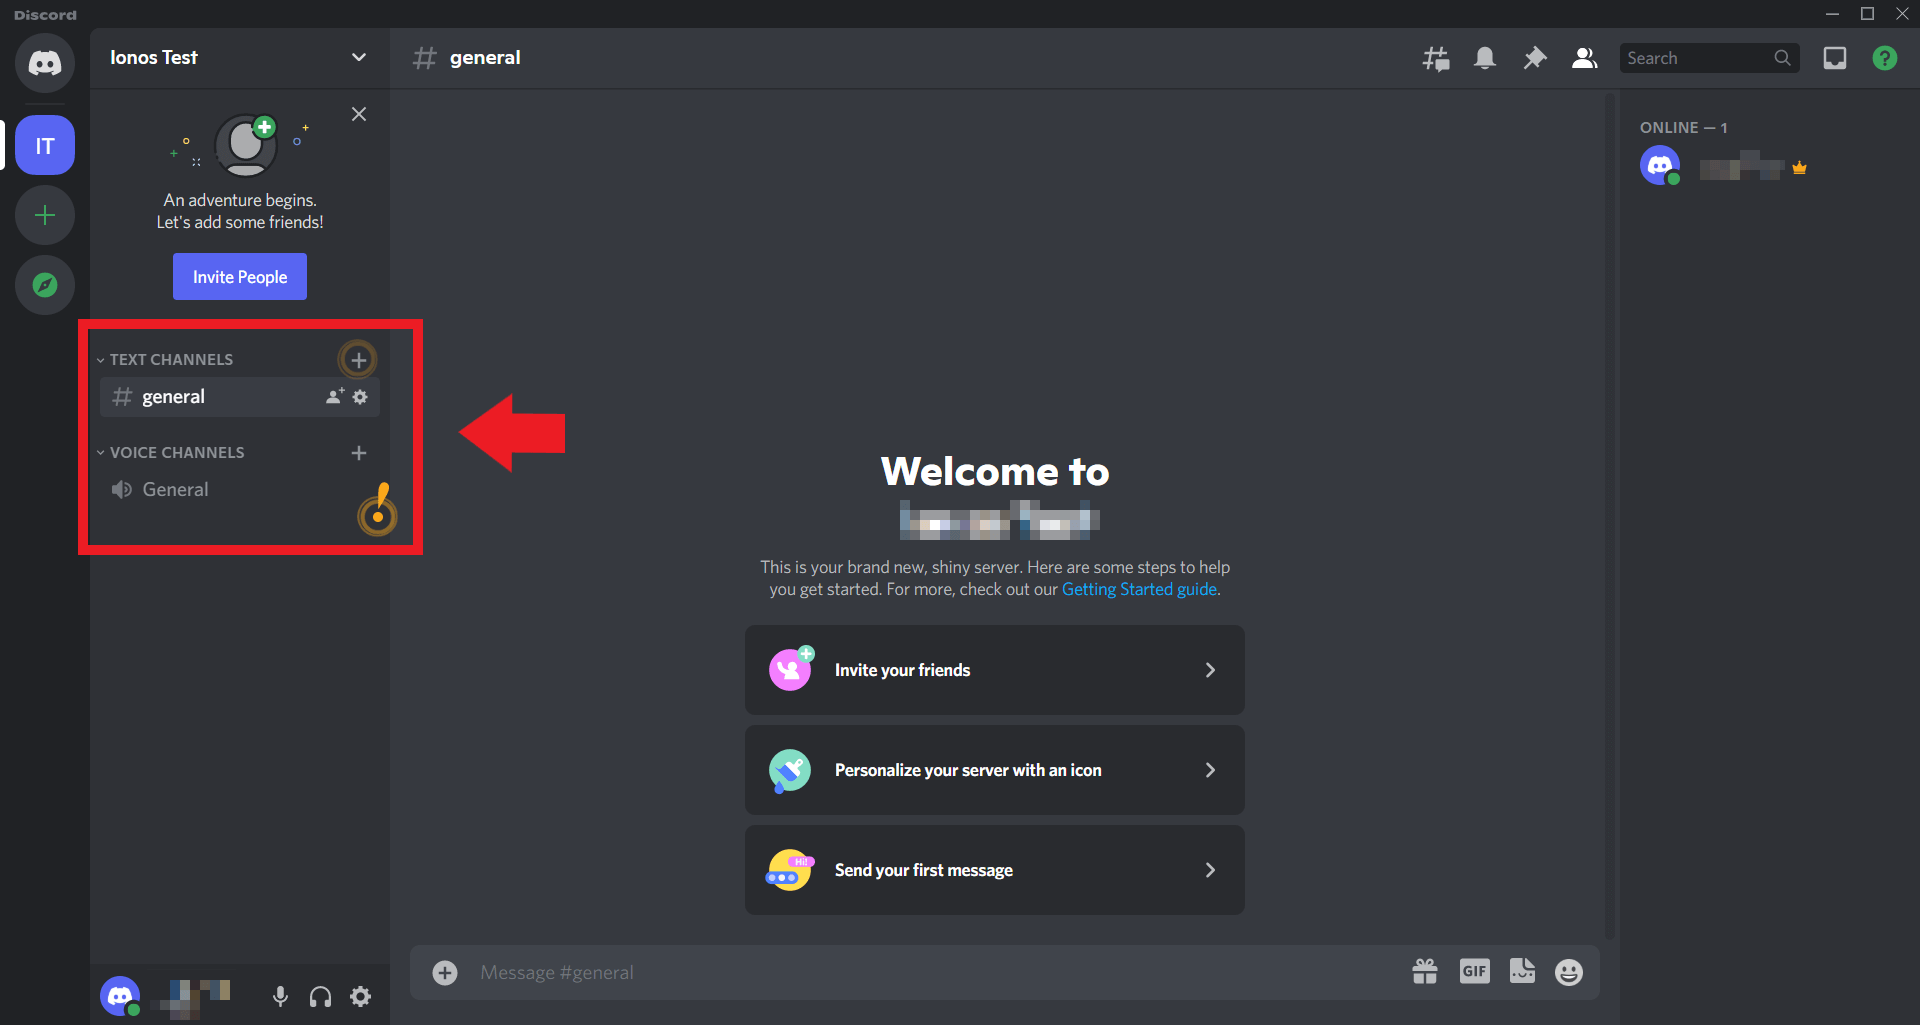 To create new channels, click on the plus symbol next to “Text Channels” and “Voice Channels”